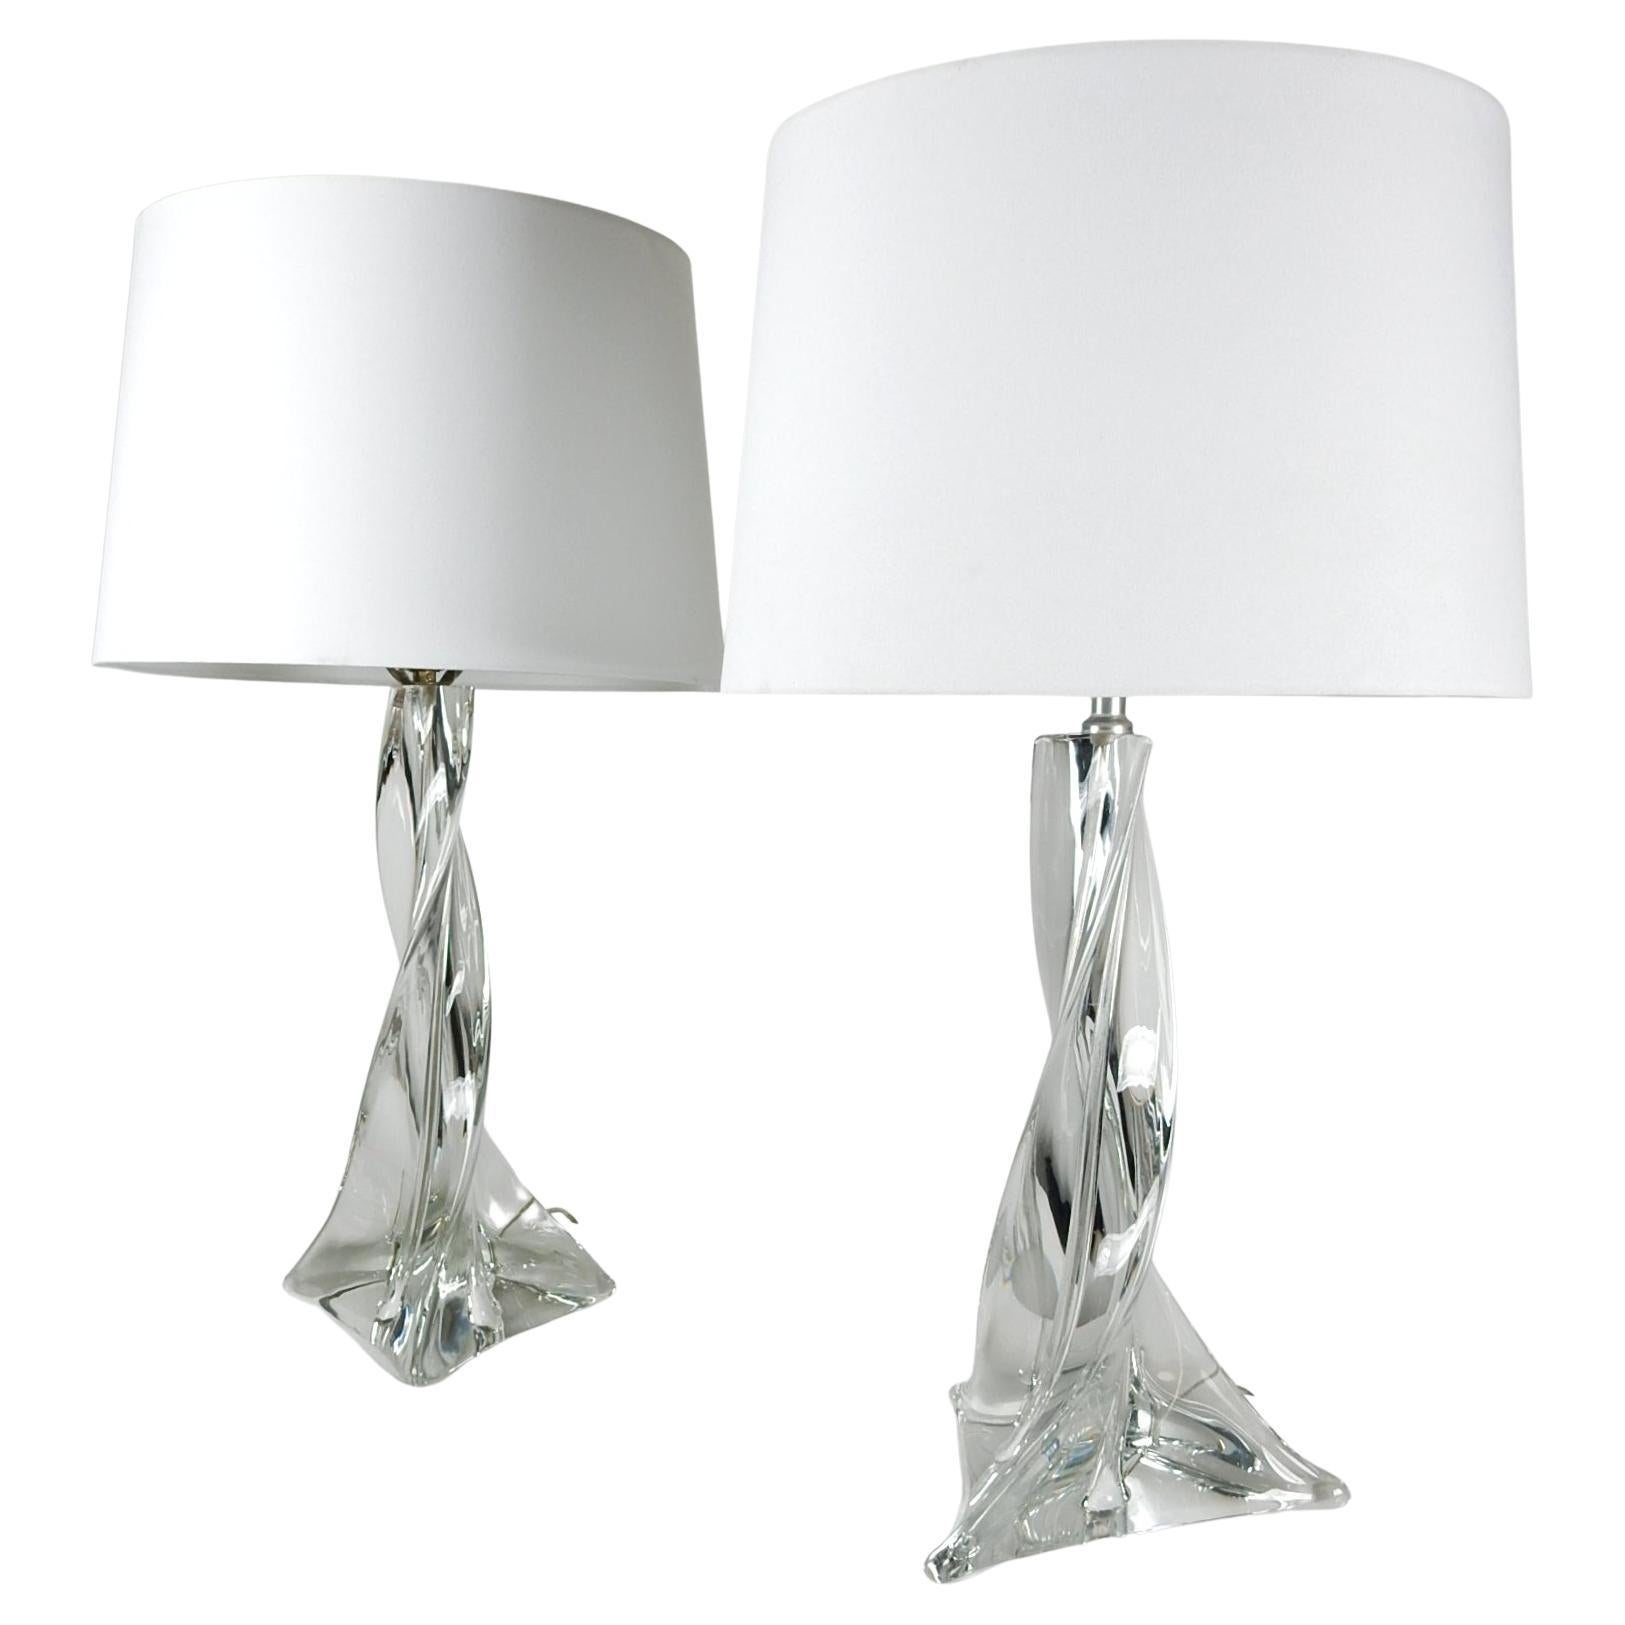 Large pair of Saint-Louis crystal of France spiraling art glass table lamps.
Gorgeous solid crystal that dazzles in light. Glass body of lamps stand 16 inch tall.
Etched signed on base of one lamp, as pictured. 
Shades pictured not original nor